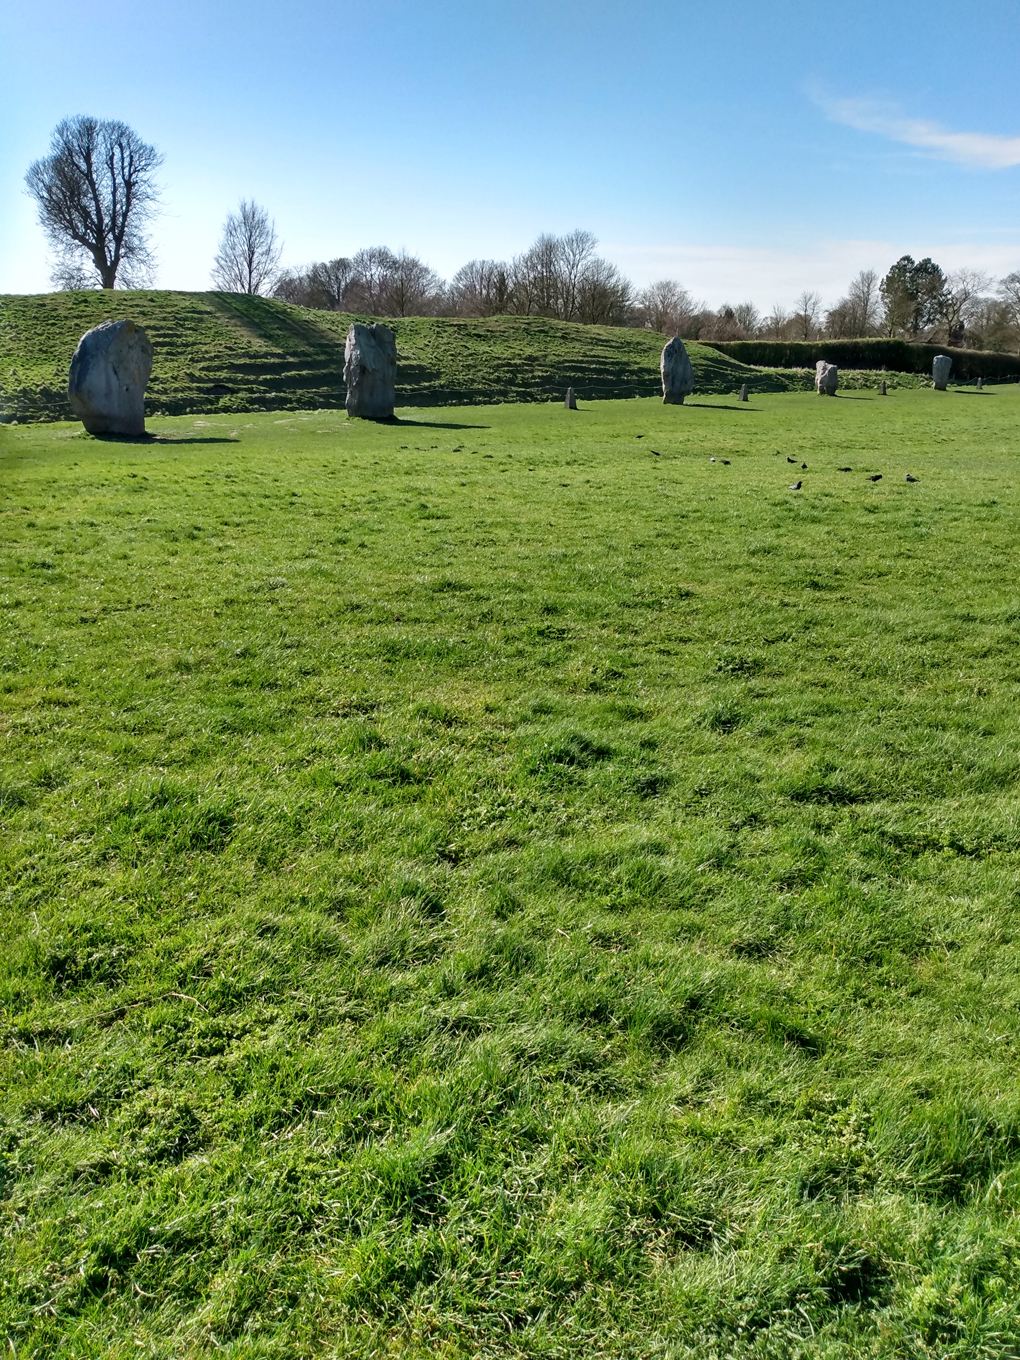 Large stones stand in a pleasant, green field at Avebury village in Wiltshire